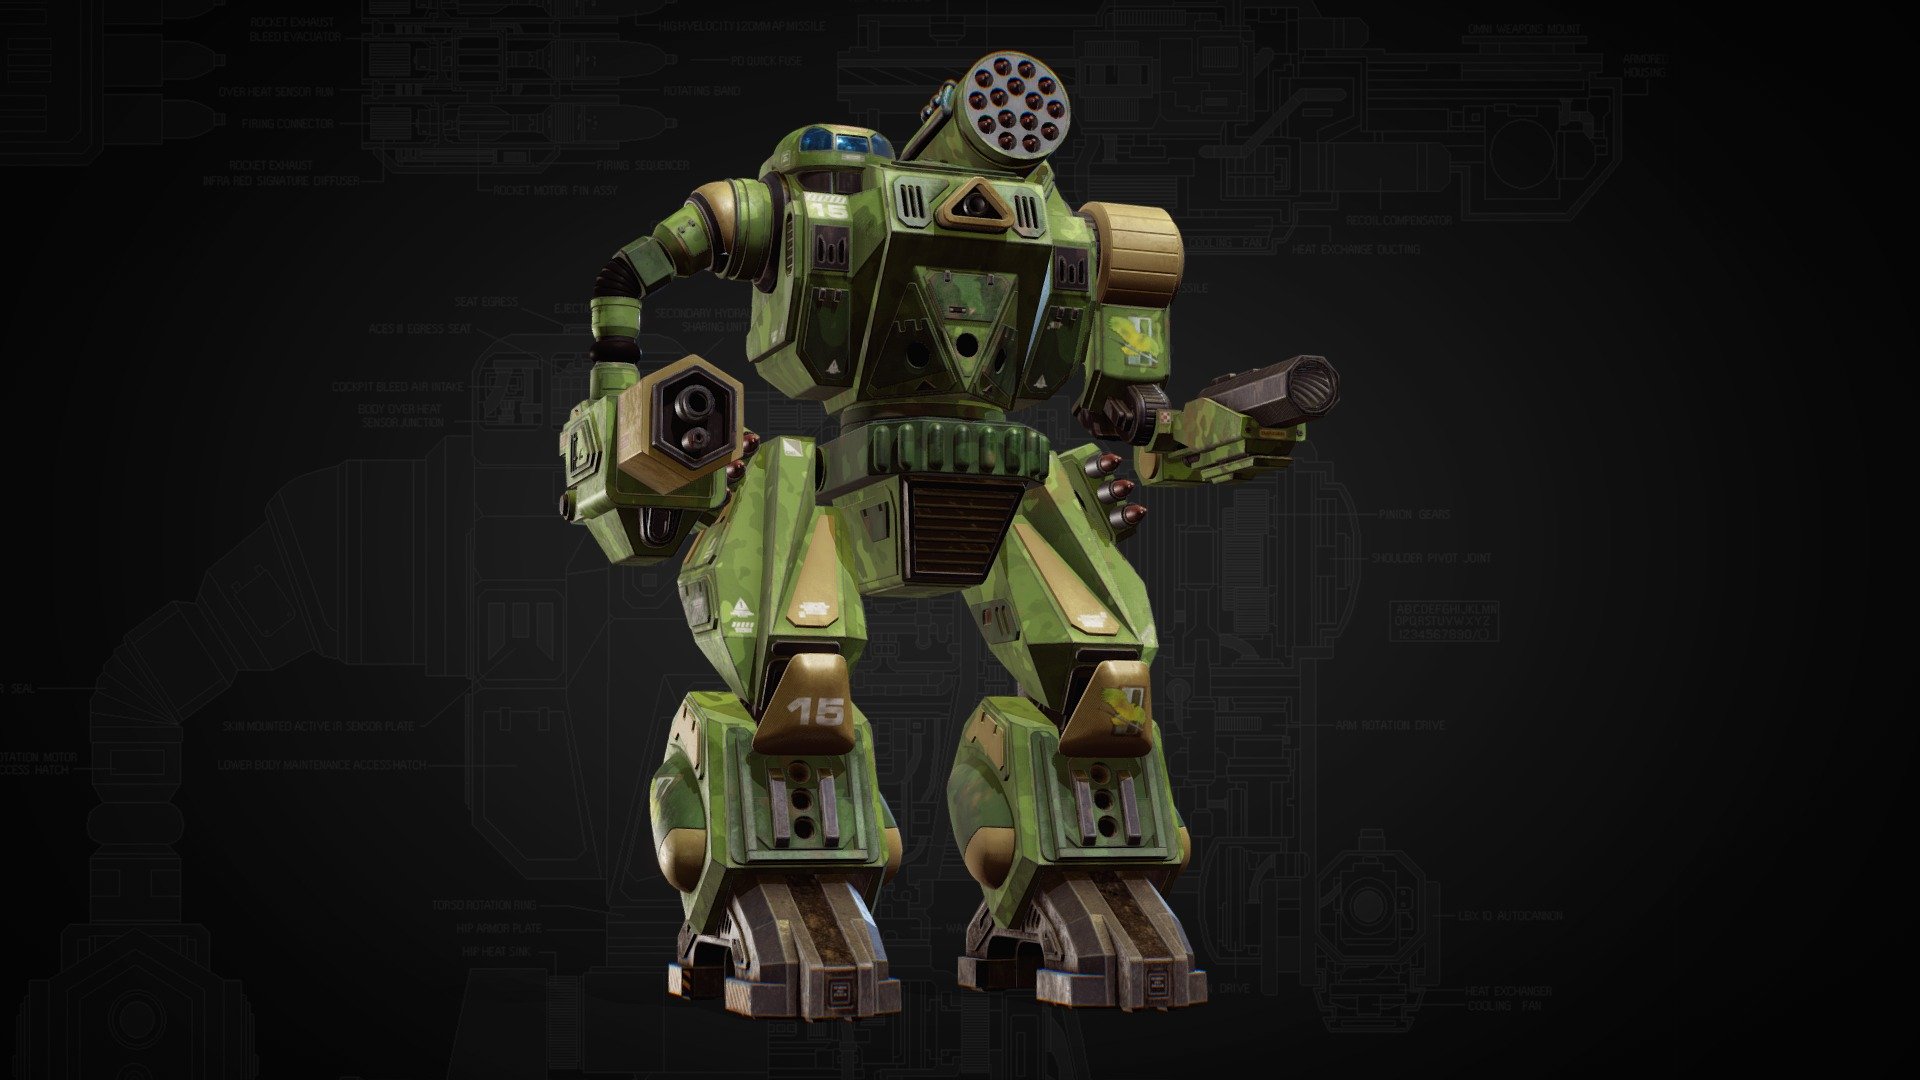 The Summoner is a highly mobile heavy OmniMech that is commonly used by Clan Jade Falcon in a wide variety of roles. Barely a second generation OmniMech, the Jade Falcons introduced the Summoner just after becoming the first Clan to win OmniMech technology from Clan Coyote in 2863. 

Clan Wolf variant: https://skfb.ly/6Ustw

The Summoner was dubbed Thor, its Inner Sphere reporting name, by Victor Steiner-Davion himself after fighting one on Trellwan. The name was supposedly inspired by the weapons loadout (in Prime configuration): a PPC and an AC, lightning and thunder, which are associated with the Norse god Thor.

Arsenals: Summoner has a basic yet effective arsenal. The primary direct fire weapon is an ER PPC backed up by an LB 10-X Autocannon that can fire both standard and cluster ammunition. For fire support and bombardment, the Summoner has an LRM-15 launcher 3d model